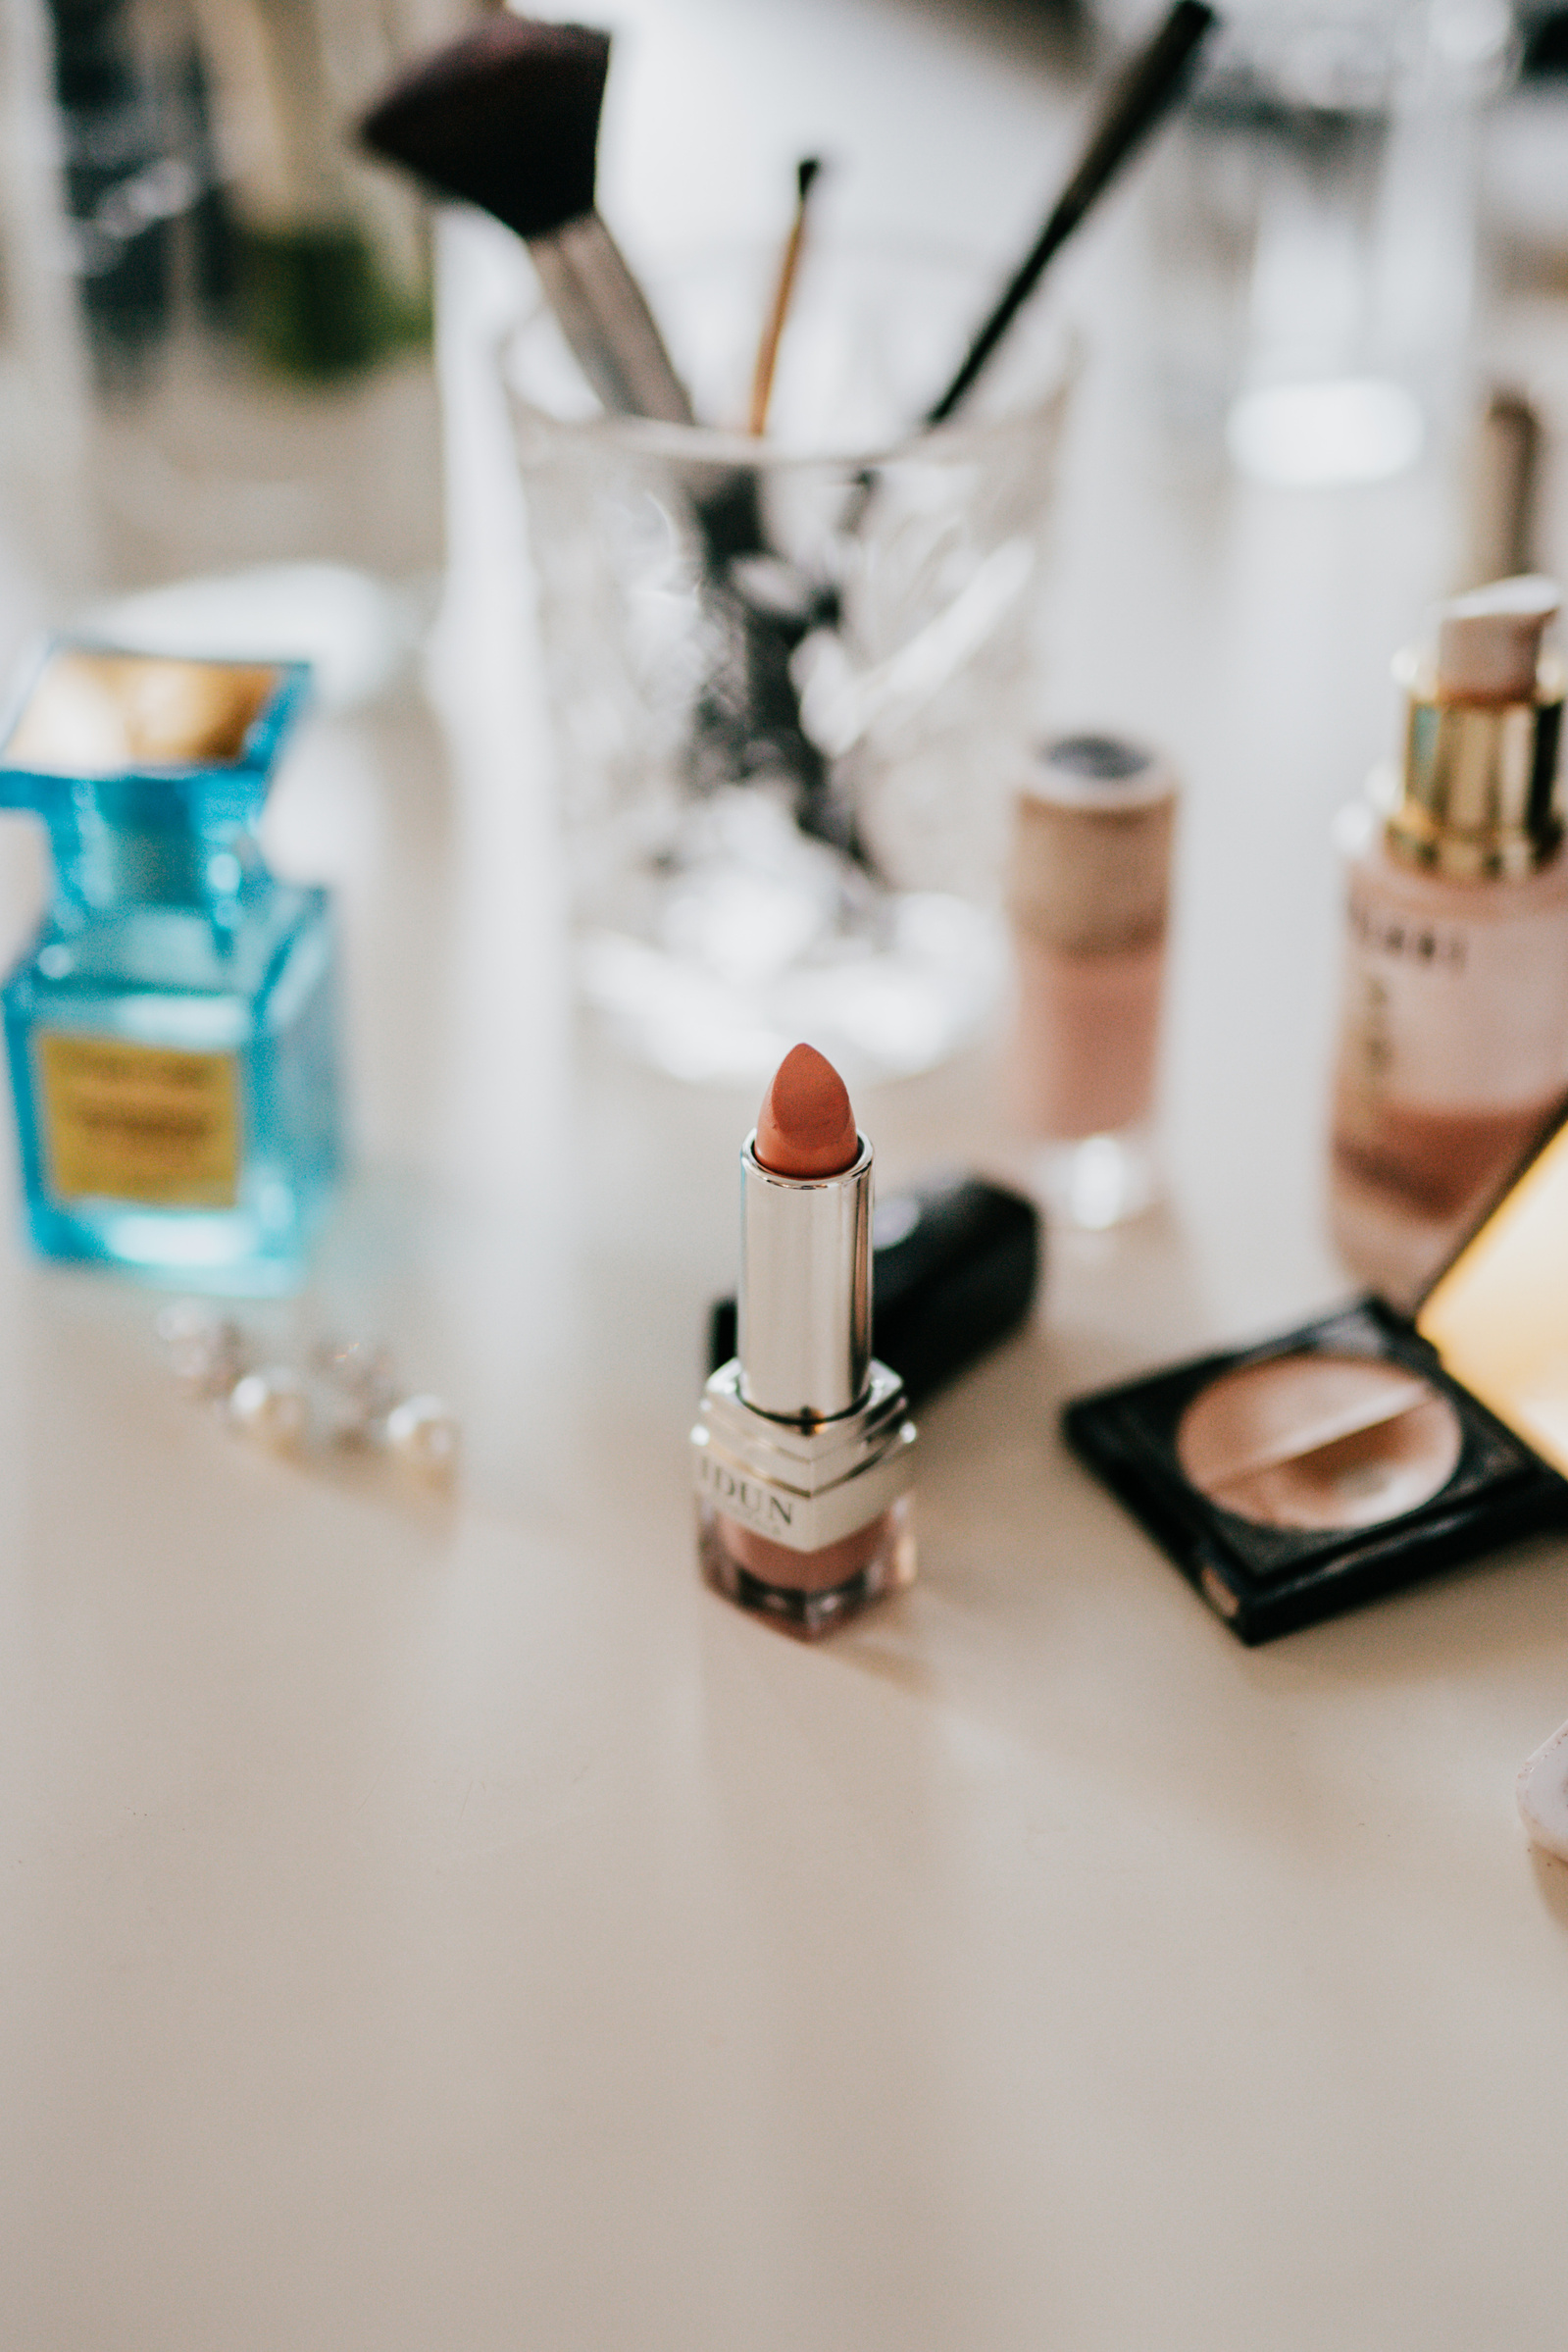 Five makeup tips every bride should know for her wedding day.